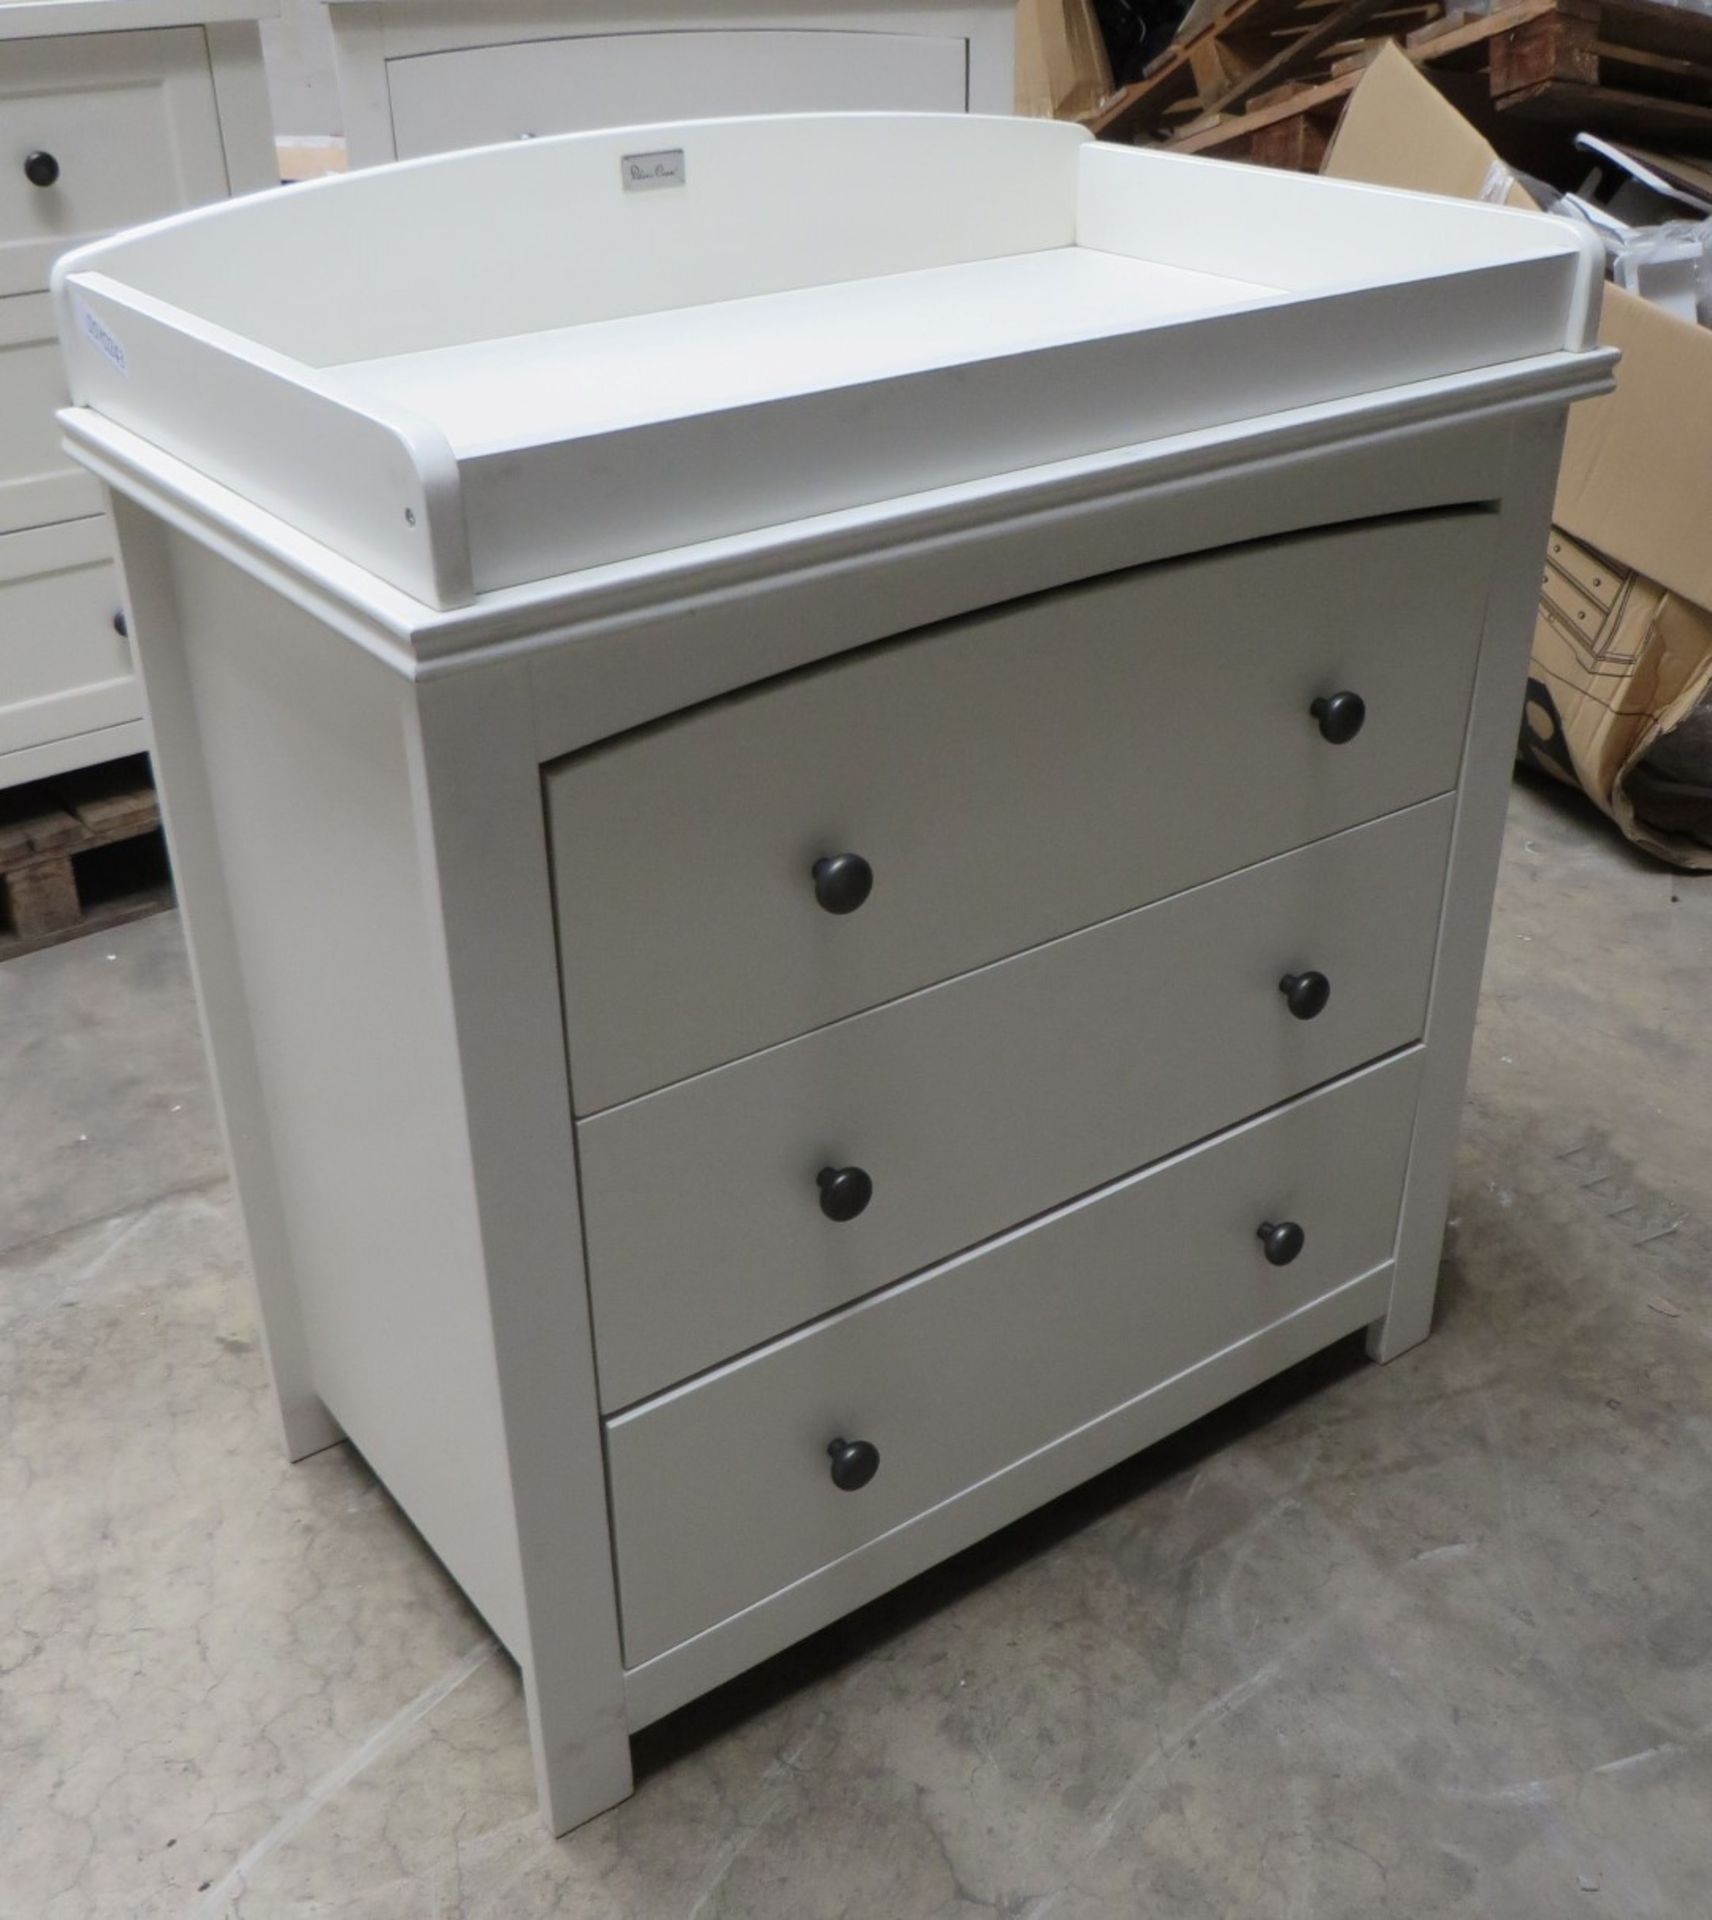 1 x Silver Cross Ashby-Style Combination Changer And Dresser - Nursery Furniture - 88x52x97.5cm - - Image 6 of 19